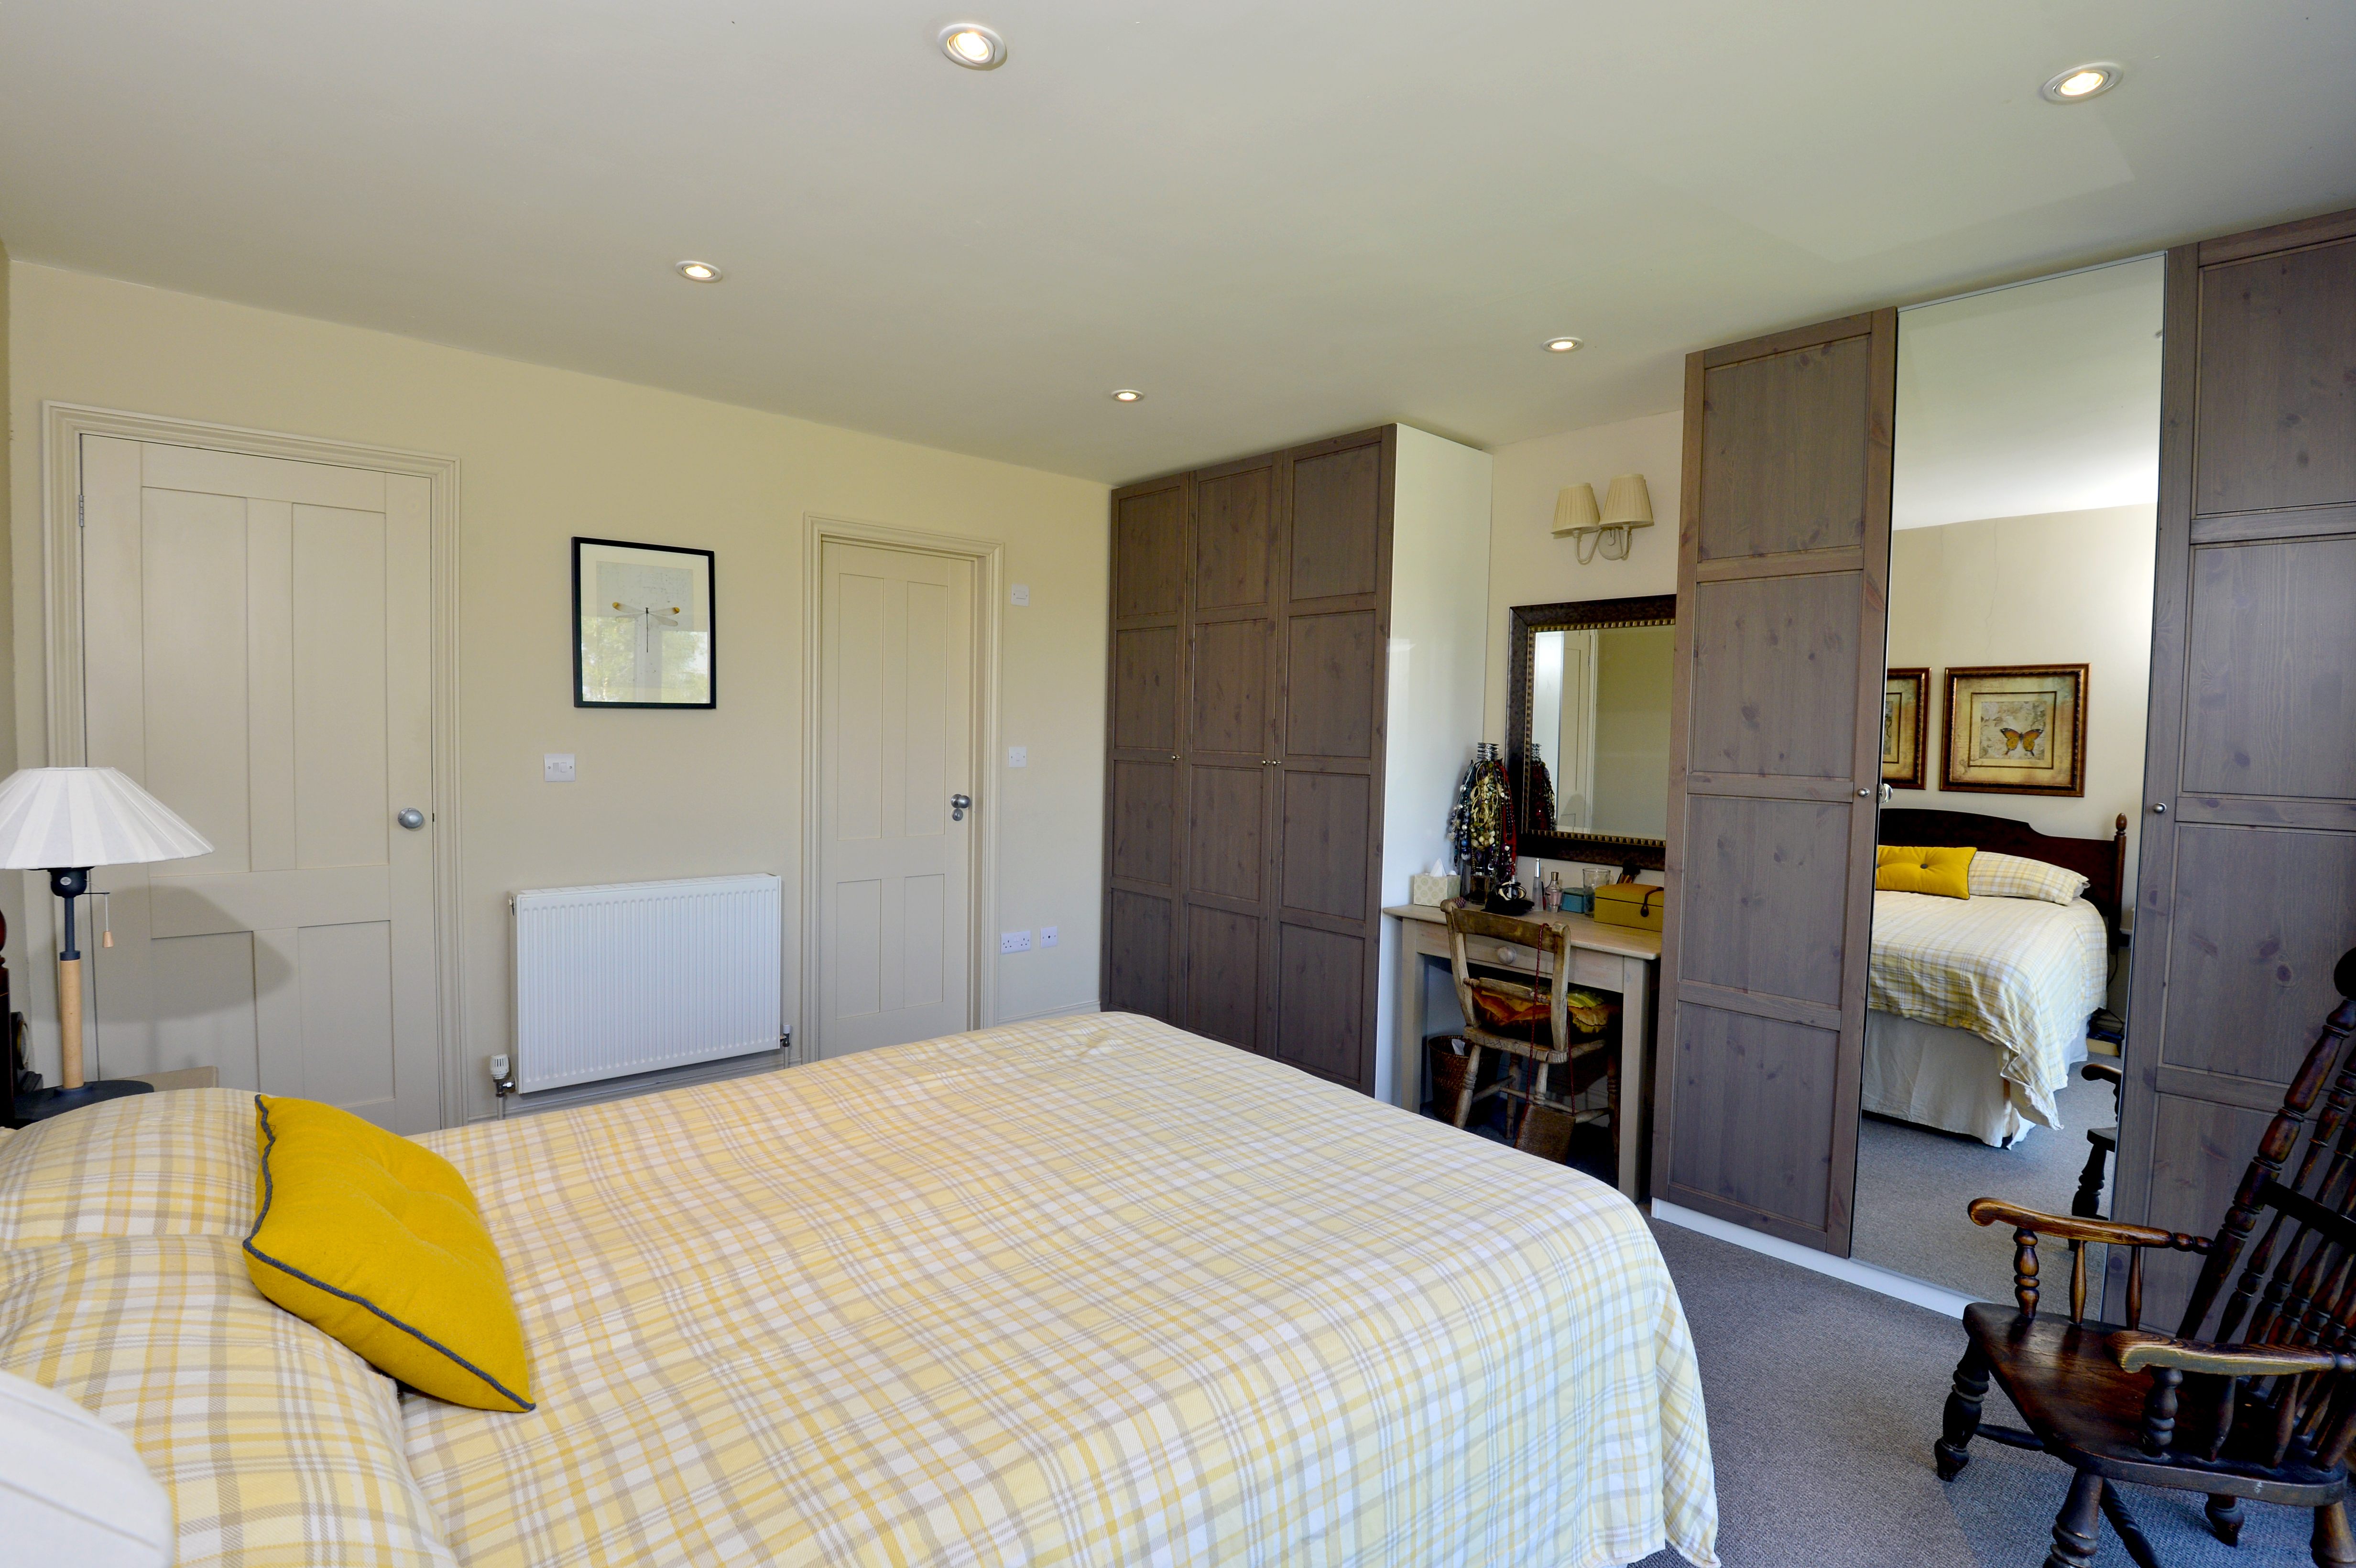 Bedroom Interior Design in in soft yellow colours by Sarah Maidment, interior designer, Brighton, Hove and East Sussex